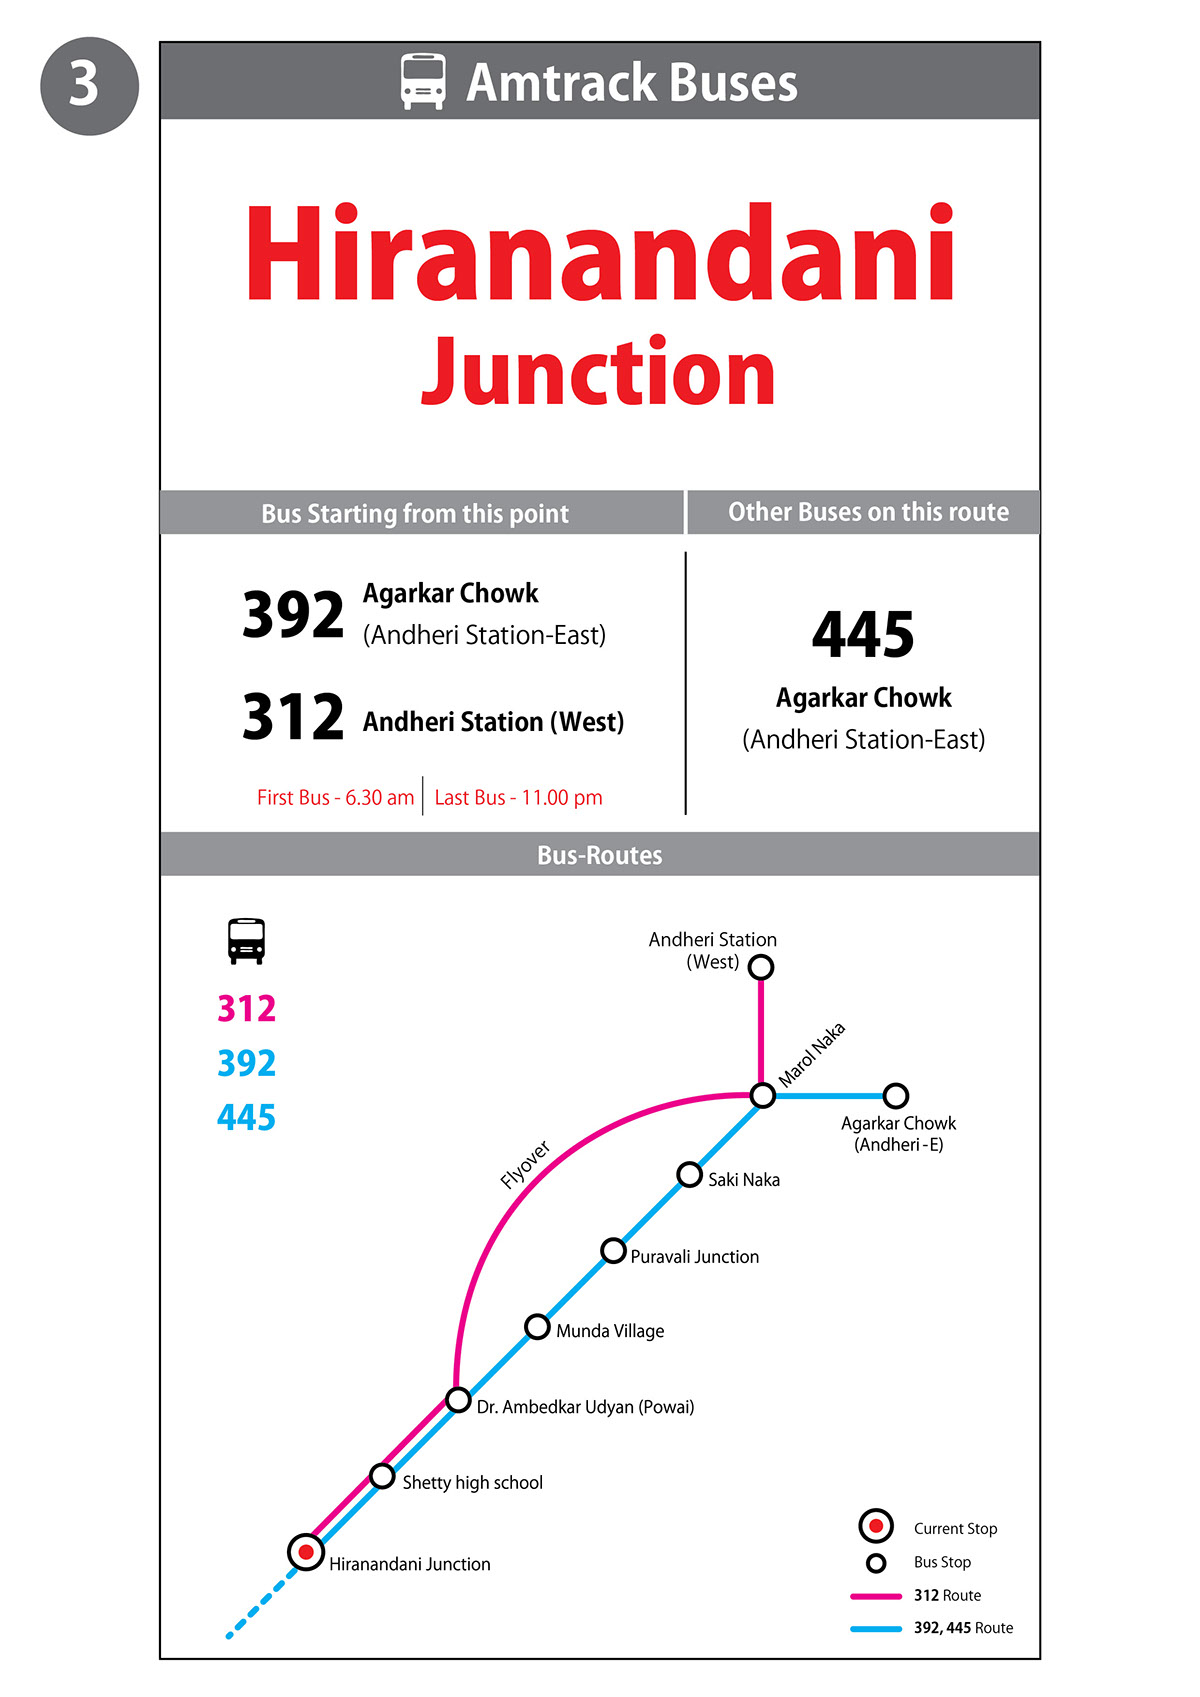 Bus-routes info graphics College work